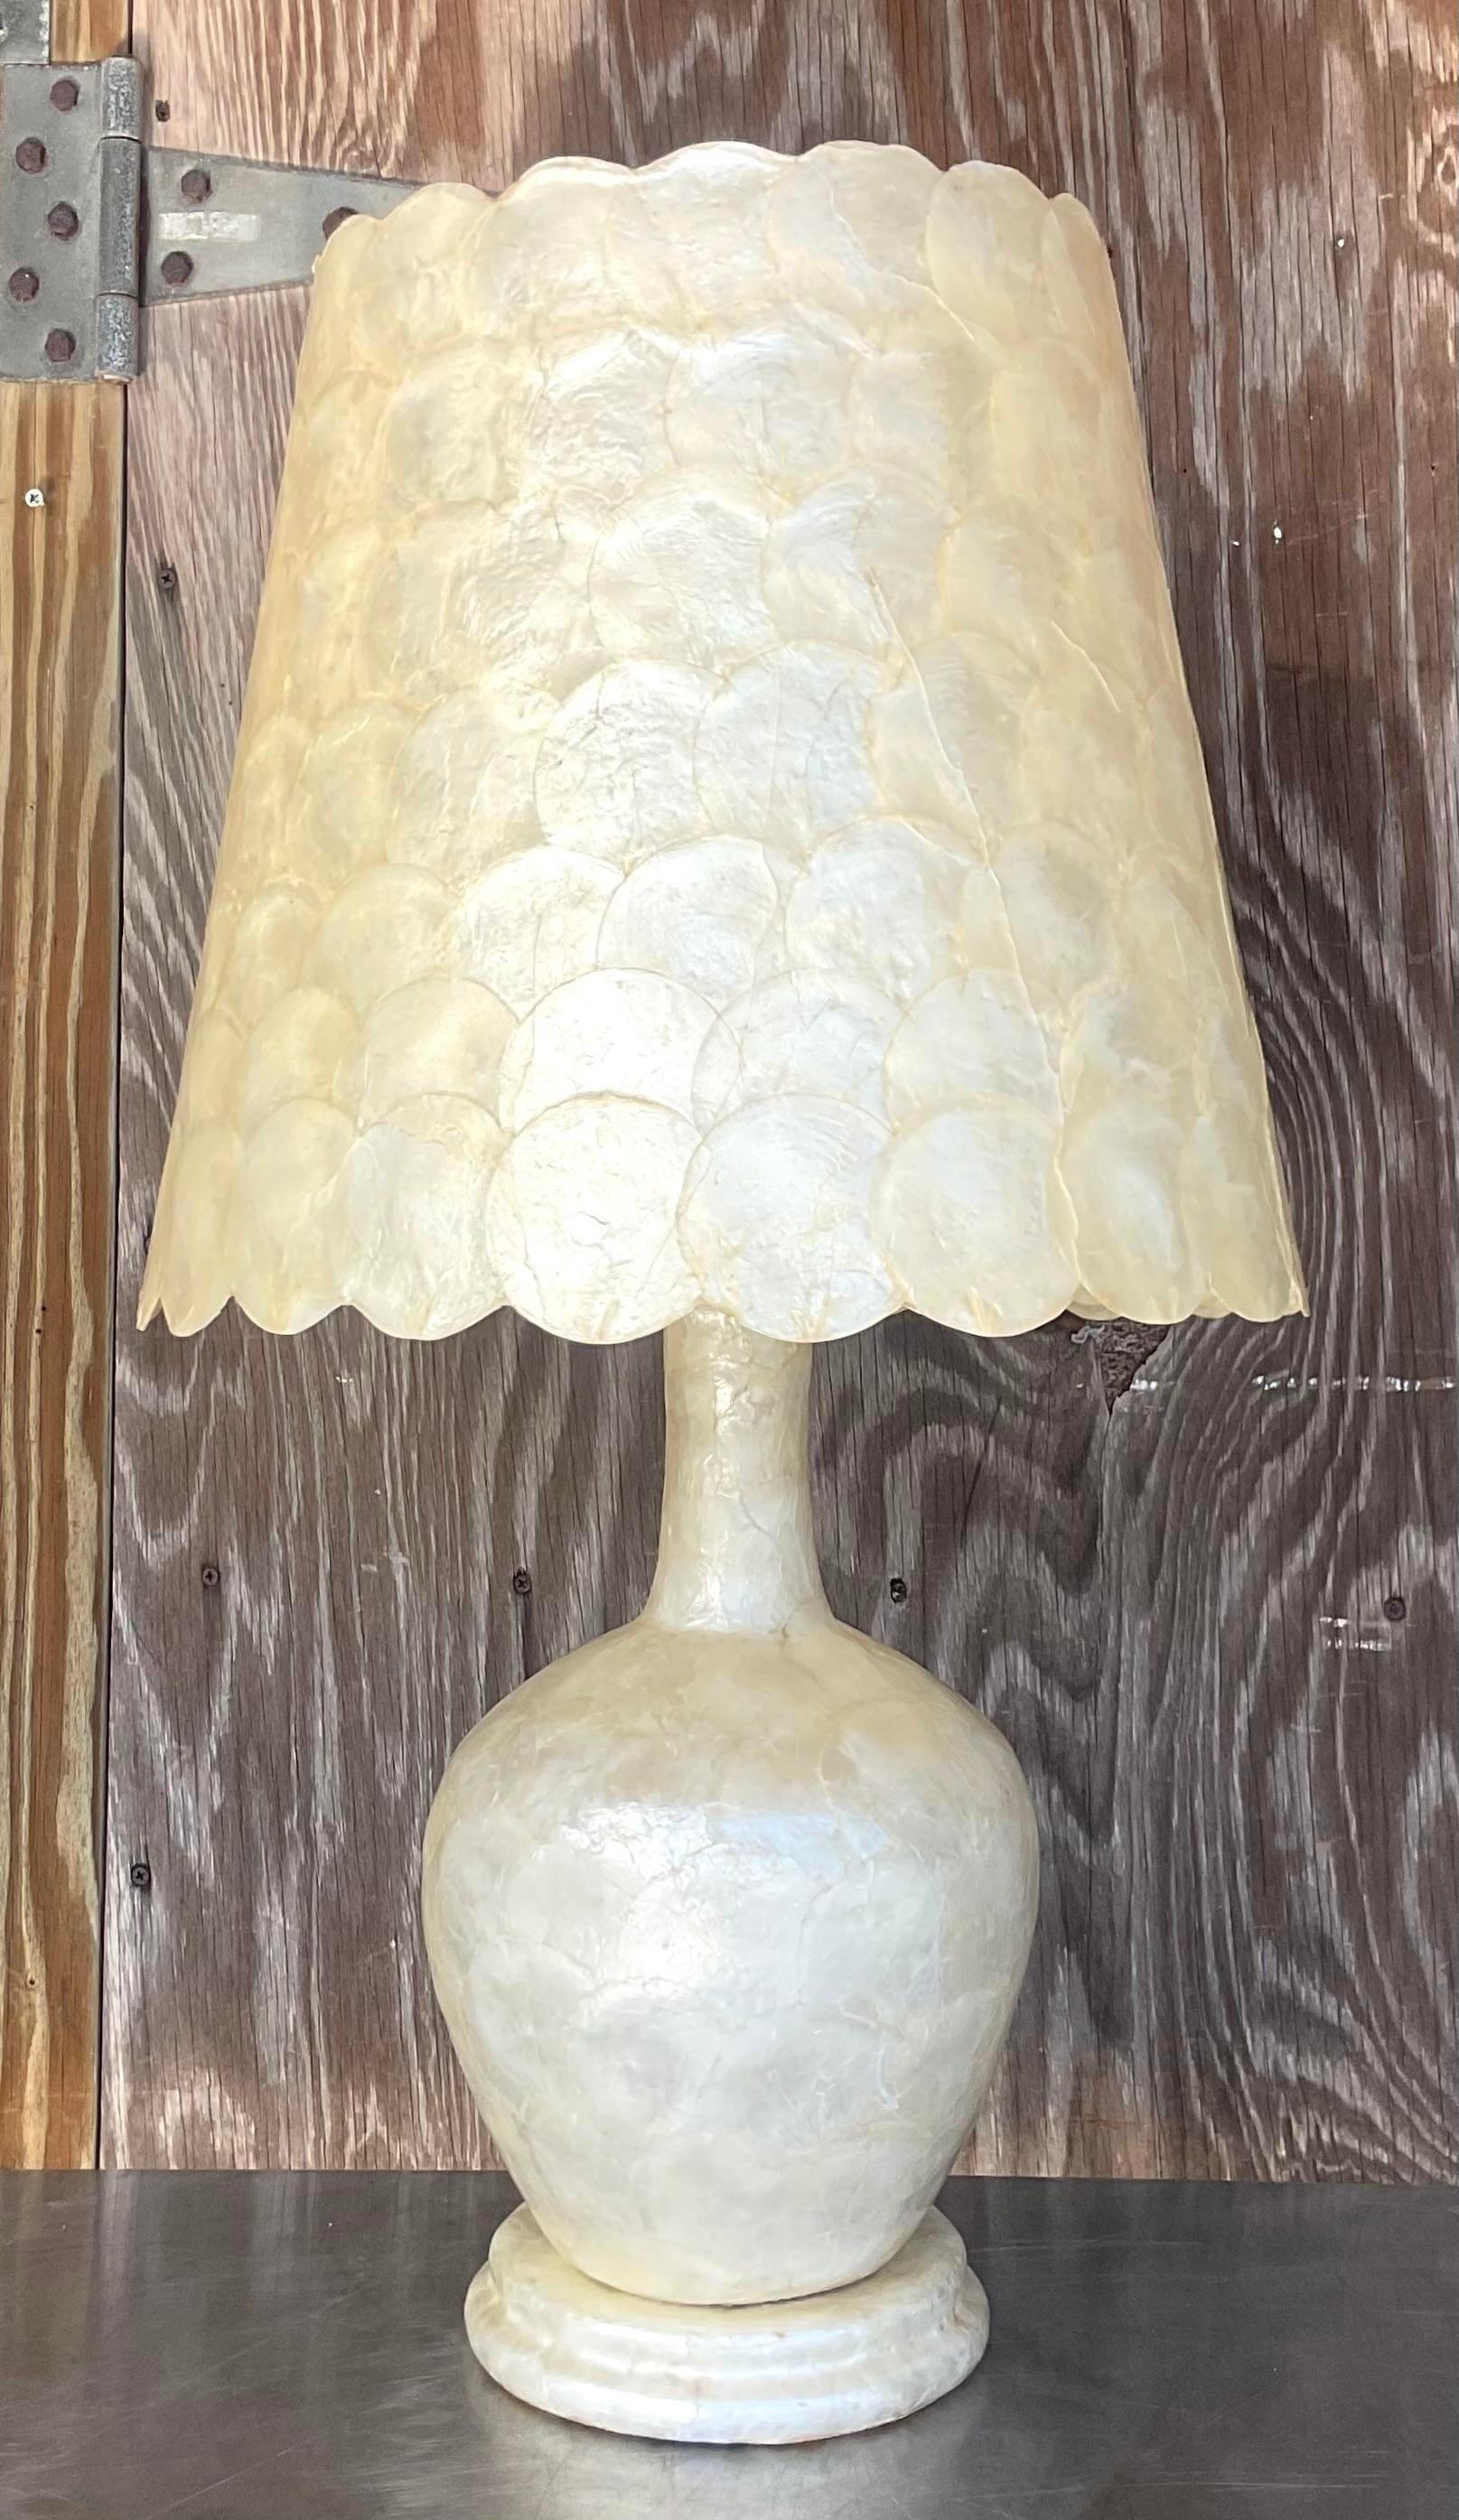 A fabulous vintage Costal table lamp. A stunning Capiz Shell Finnish with a coordinating scalloped shade. Acquired from a Palm Beach estate.